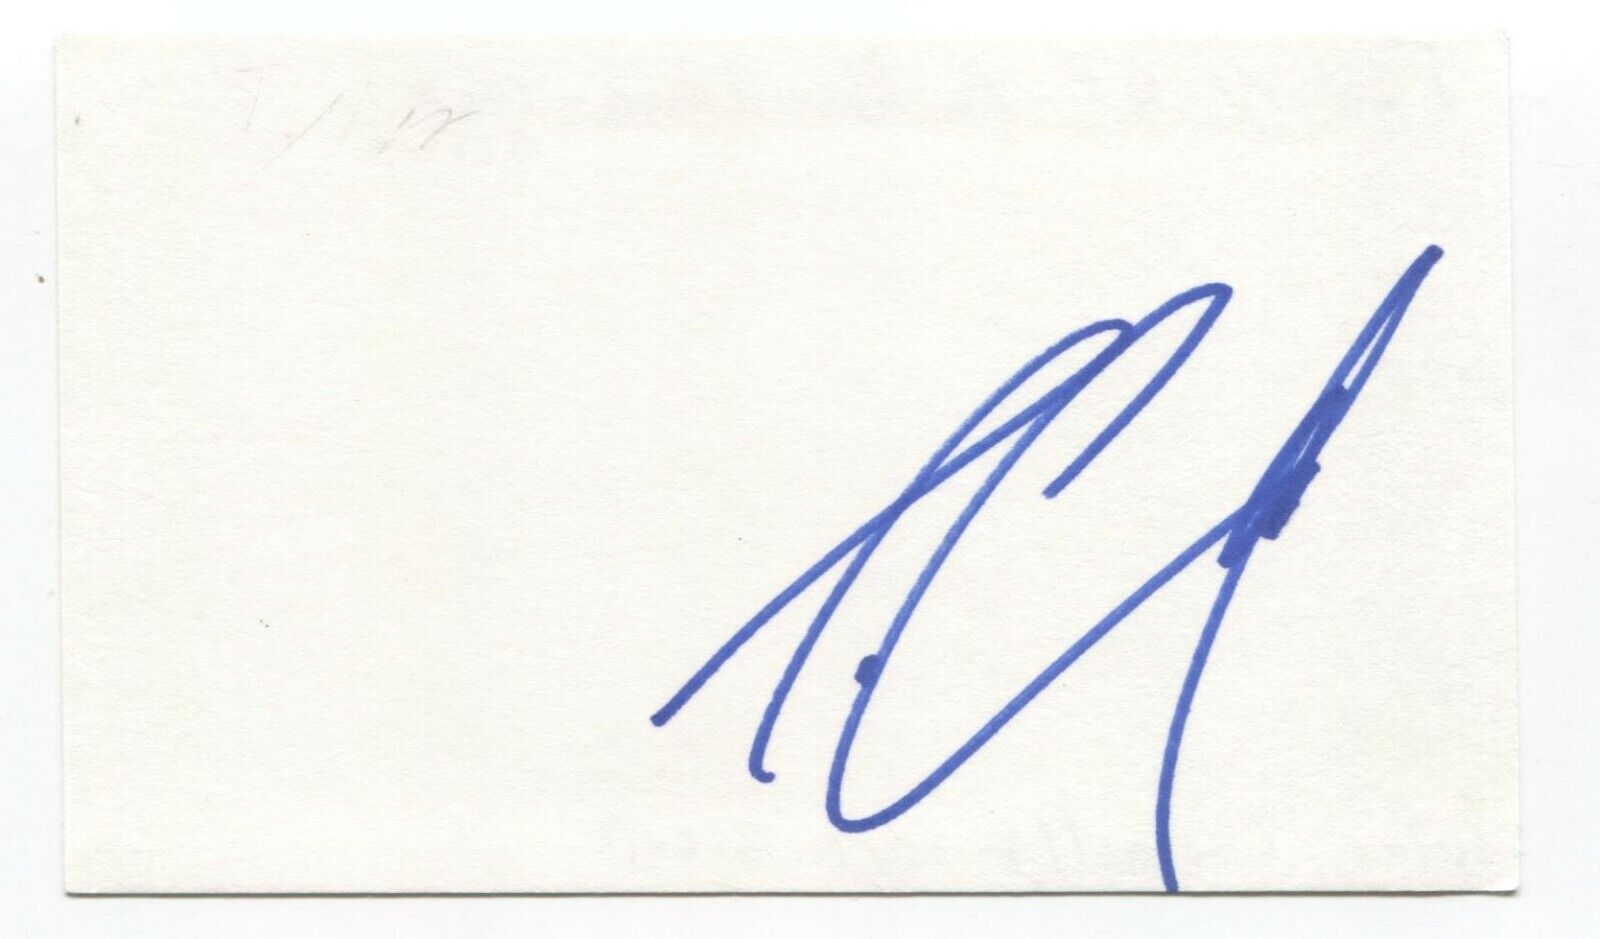 Theory of a Deadman - Tyler Connolly Signed 3x5 Index Card Autographed Signature